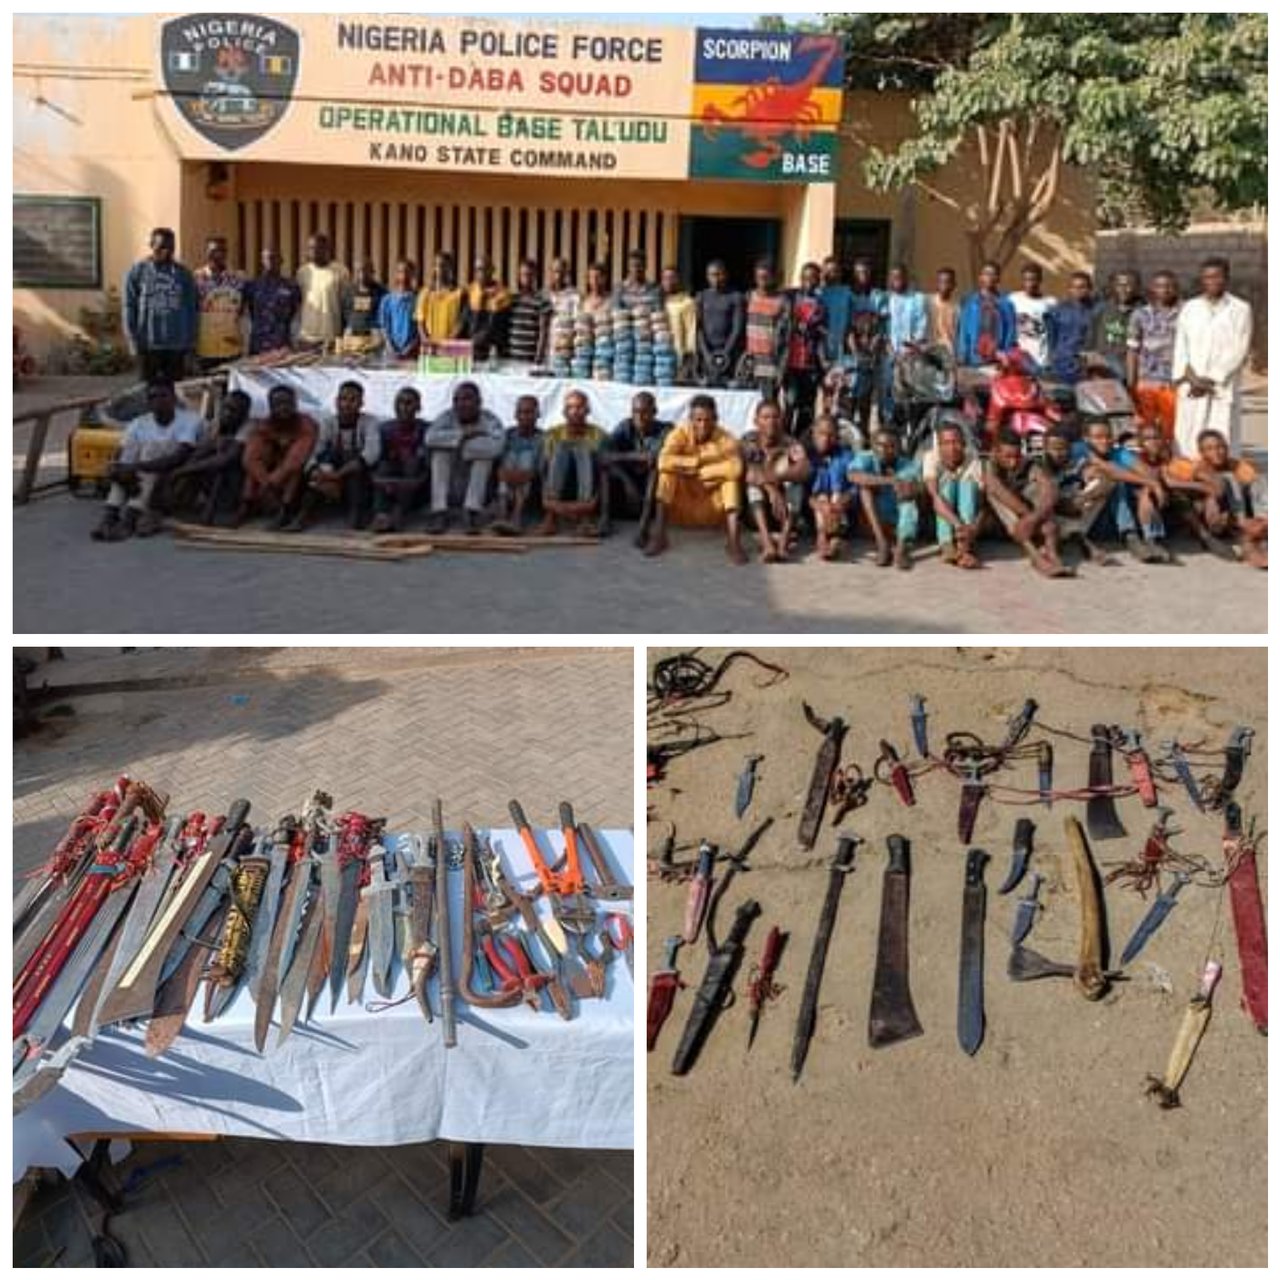 93 suspected political thugs arrested in Kano, weapons recovered